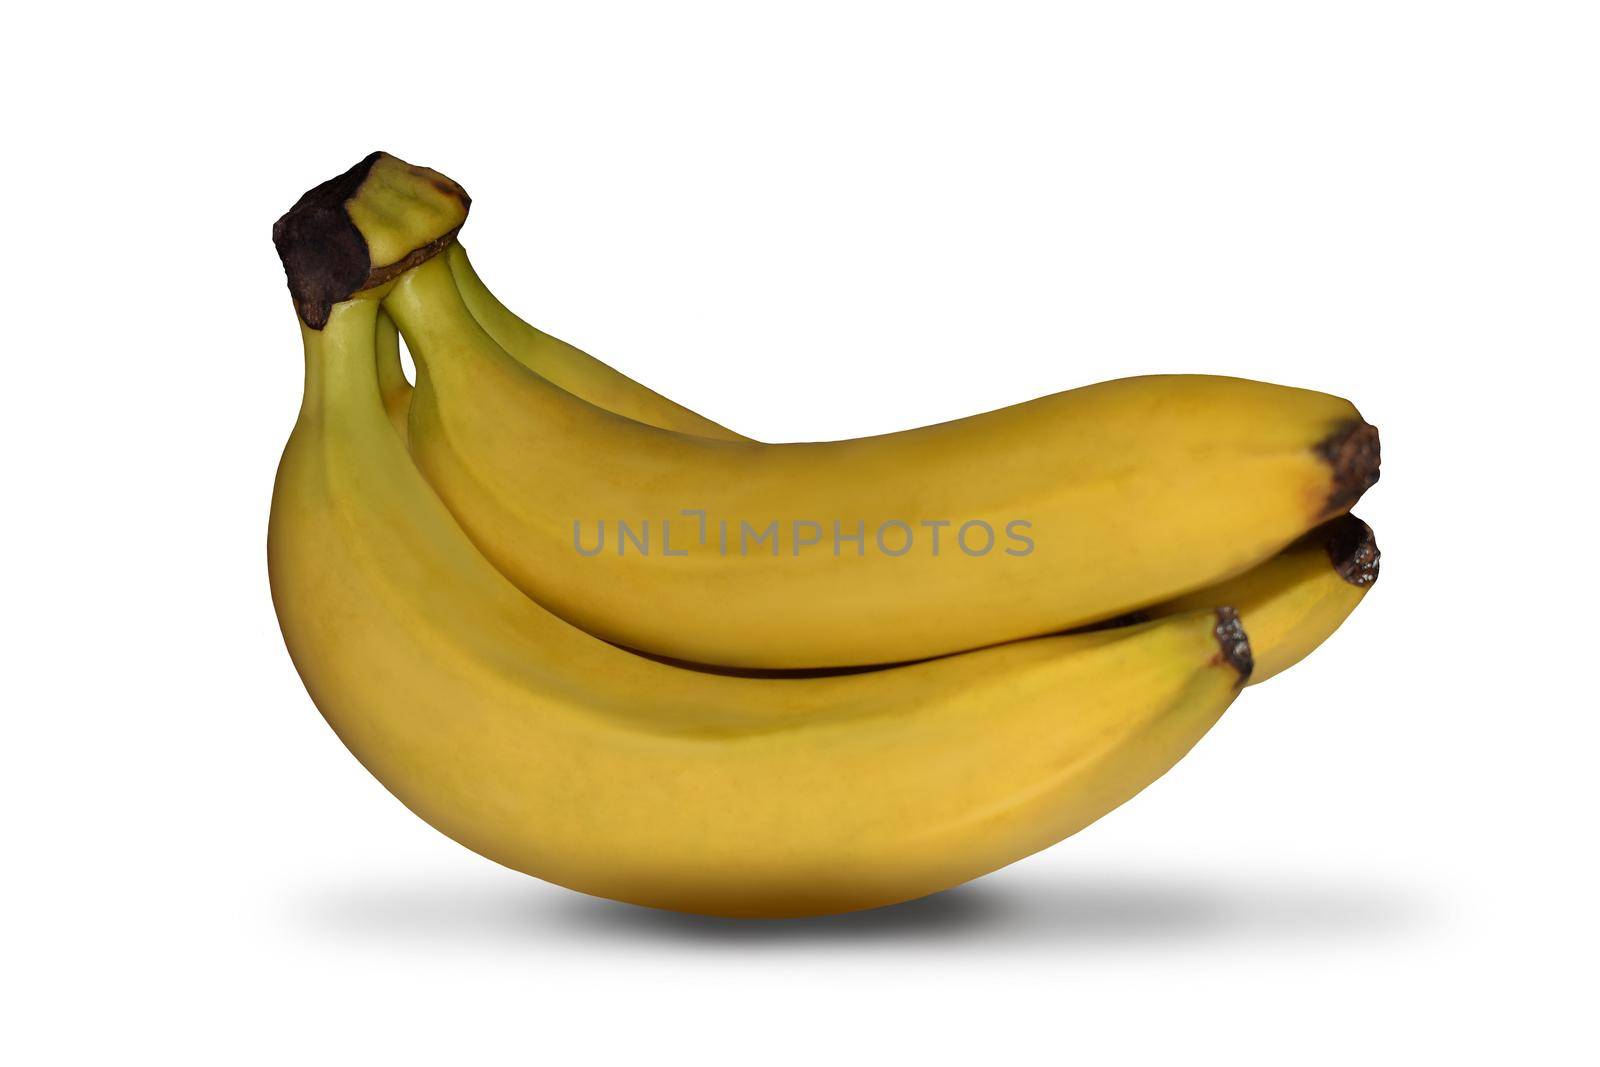 Bunch of bananas isolated on white background, close up view